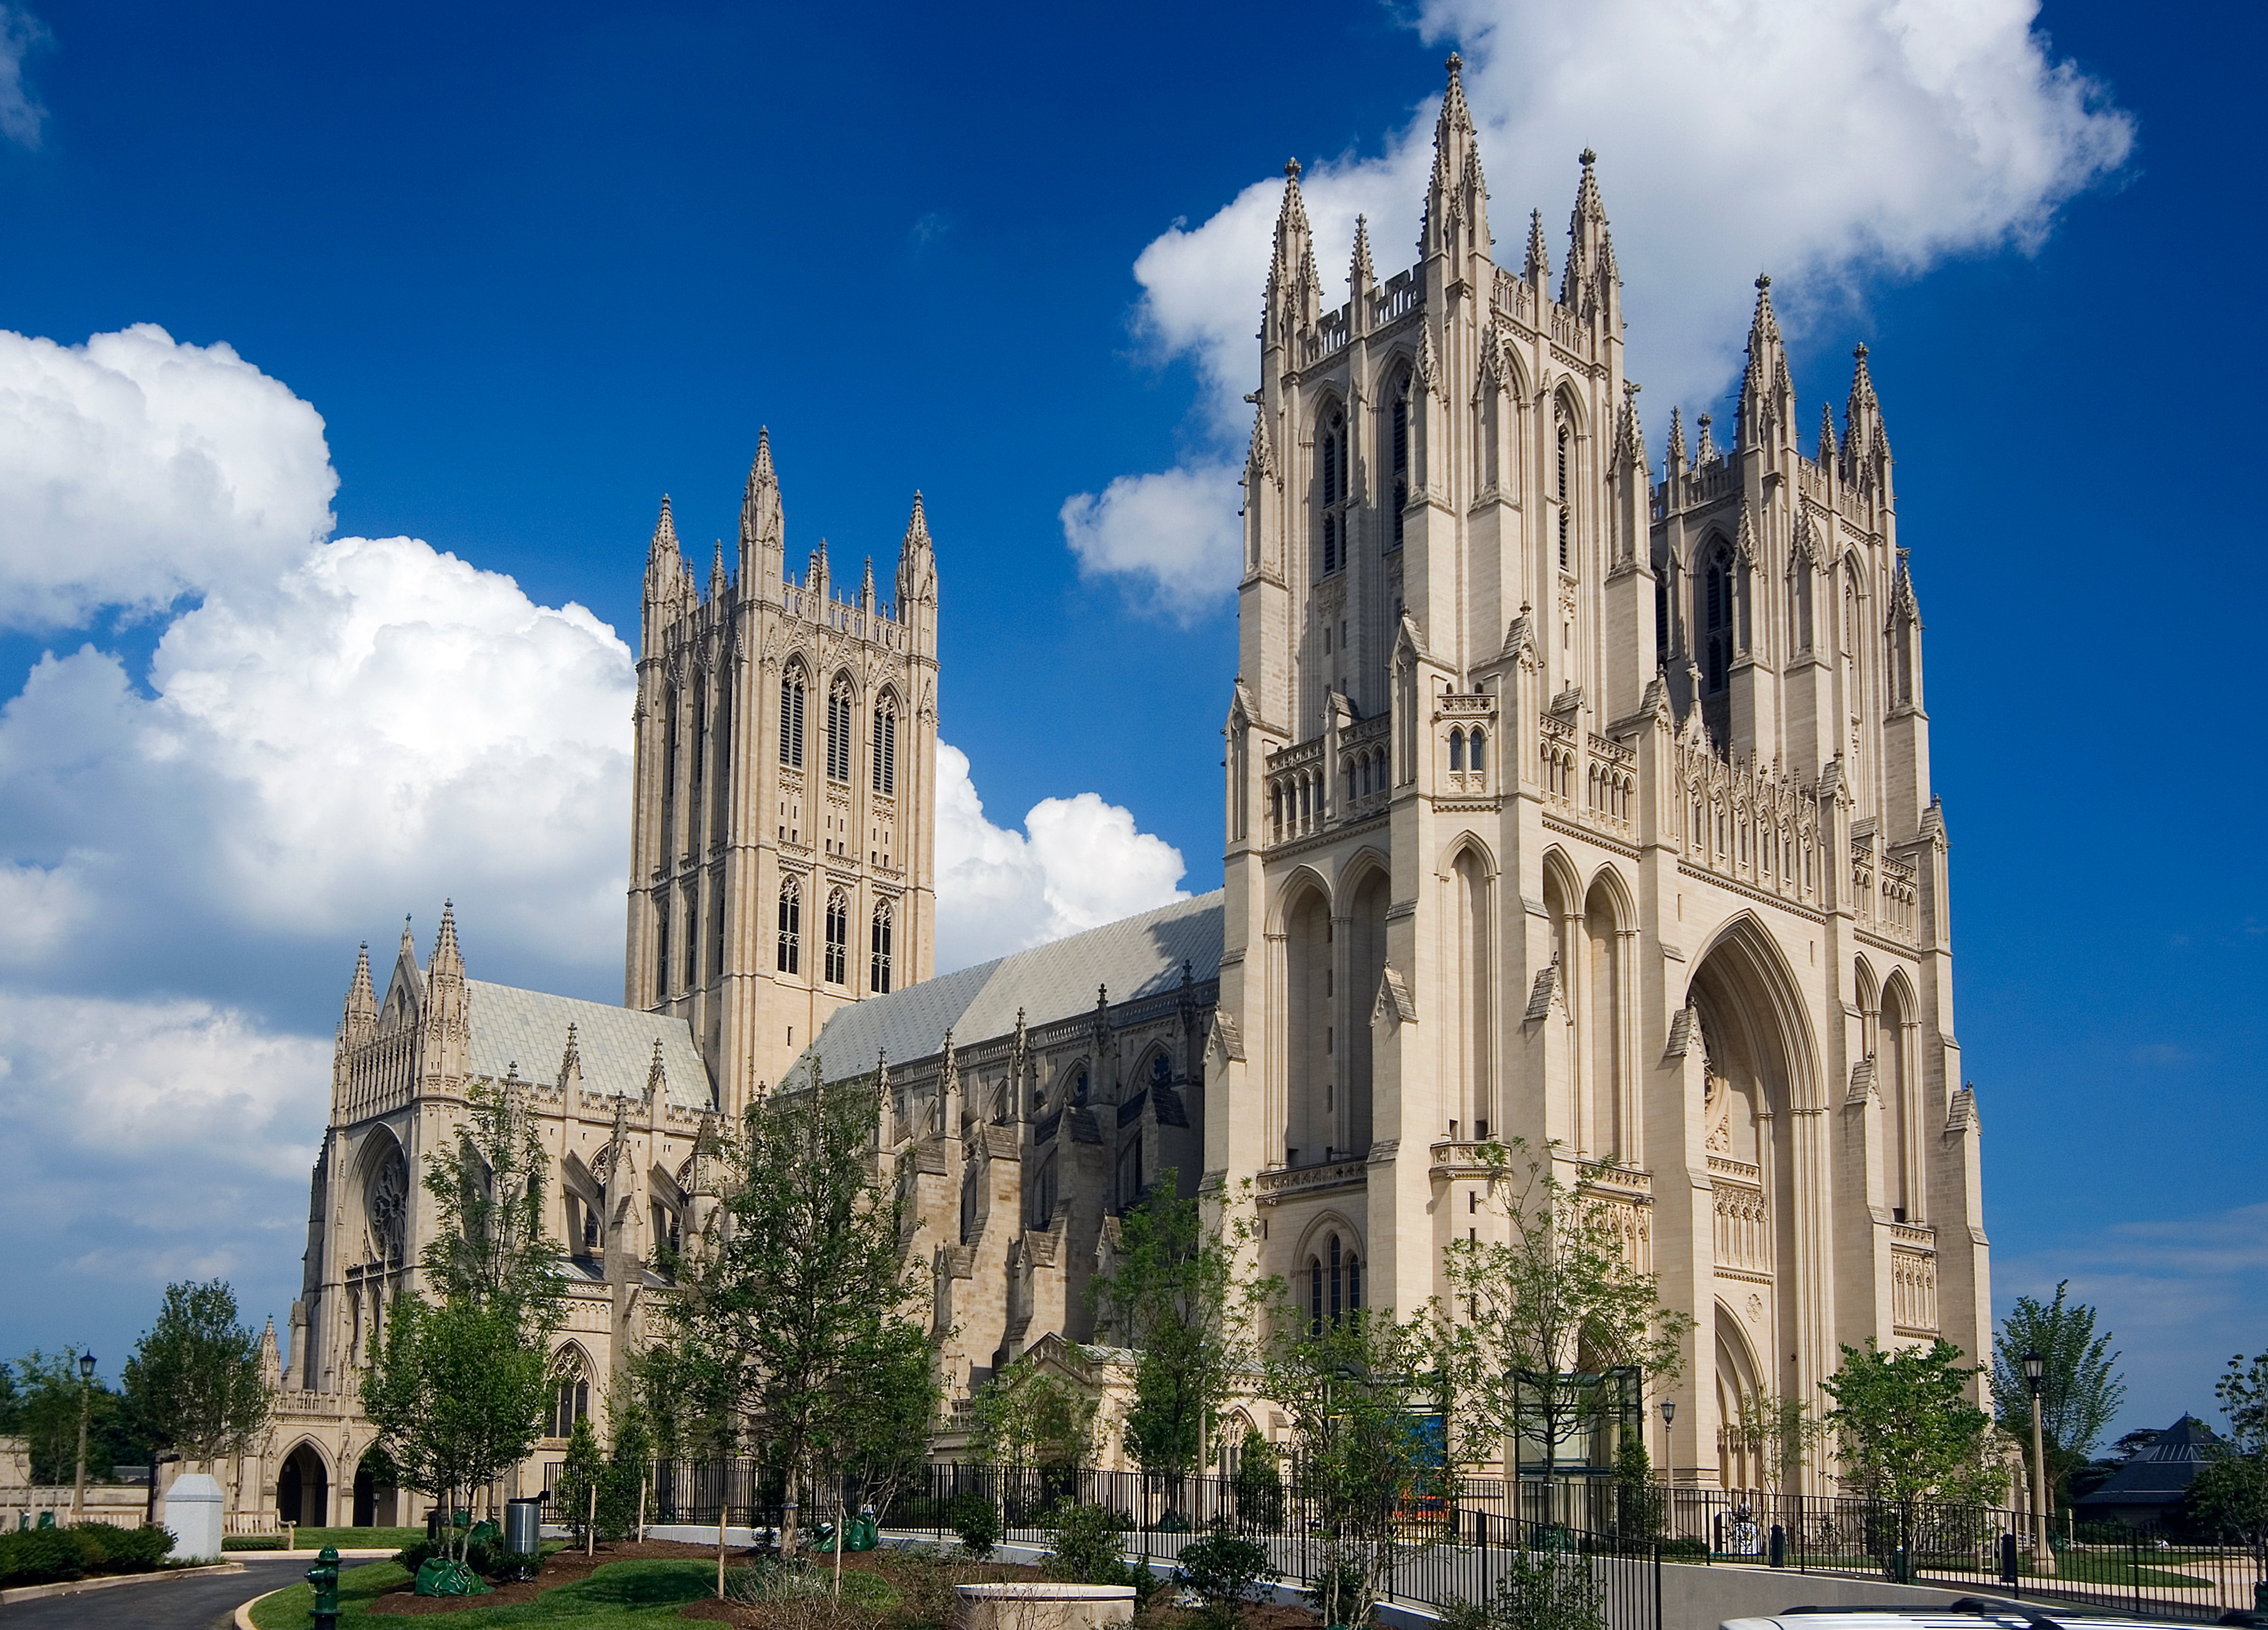 The Washington National Cathedral in Washington, D.C. (Paul Whitfield—Getty Images/Dorling Kindersley)